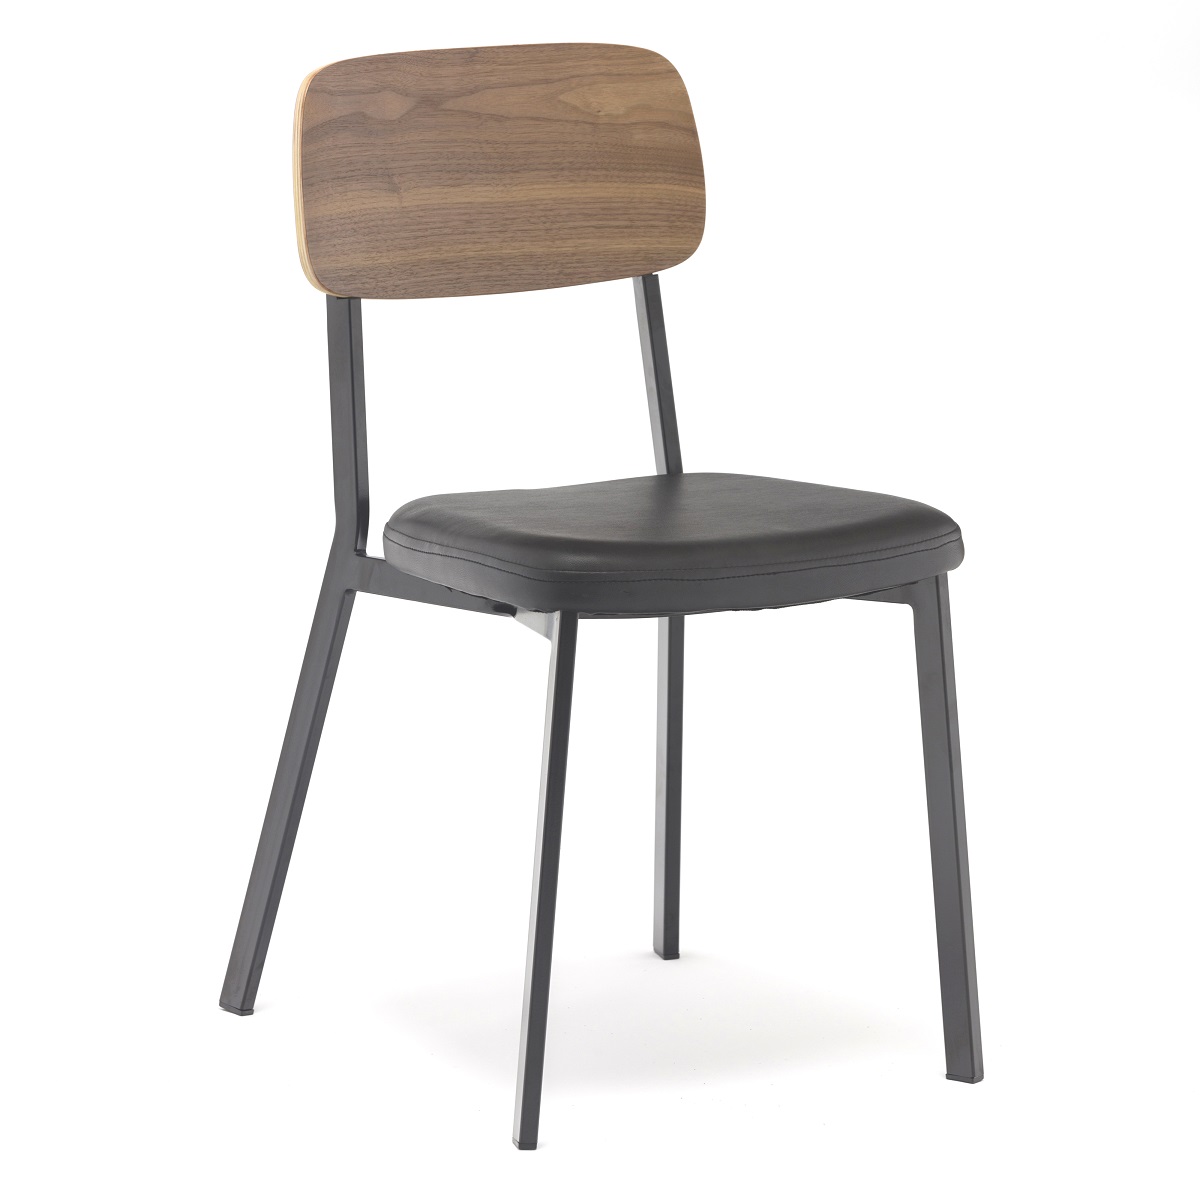 Metal Chair with Upholstered Seat